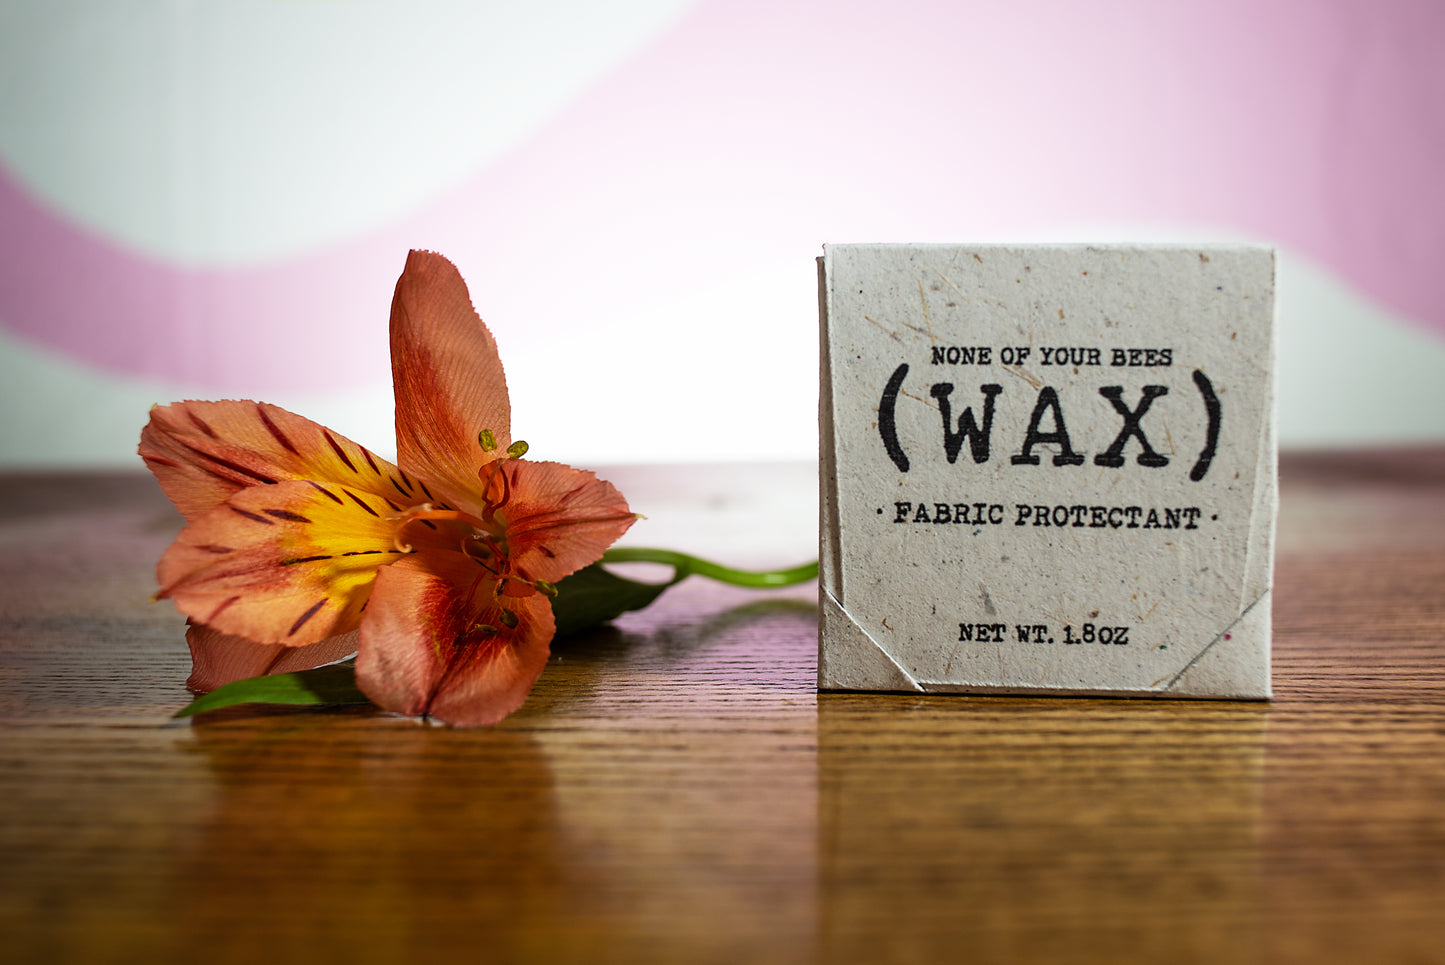 NONE OF YOUR BEES(WAX): Vegan Fabric Protectant